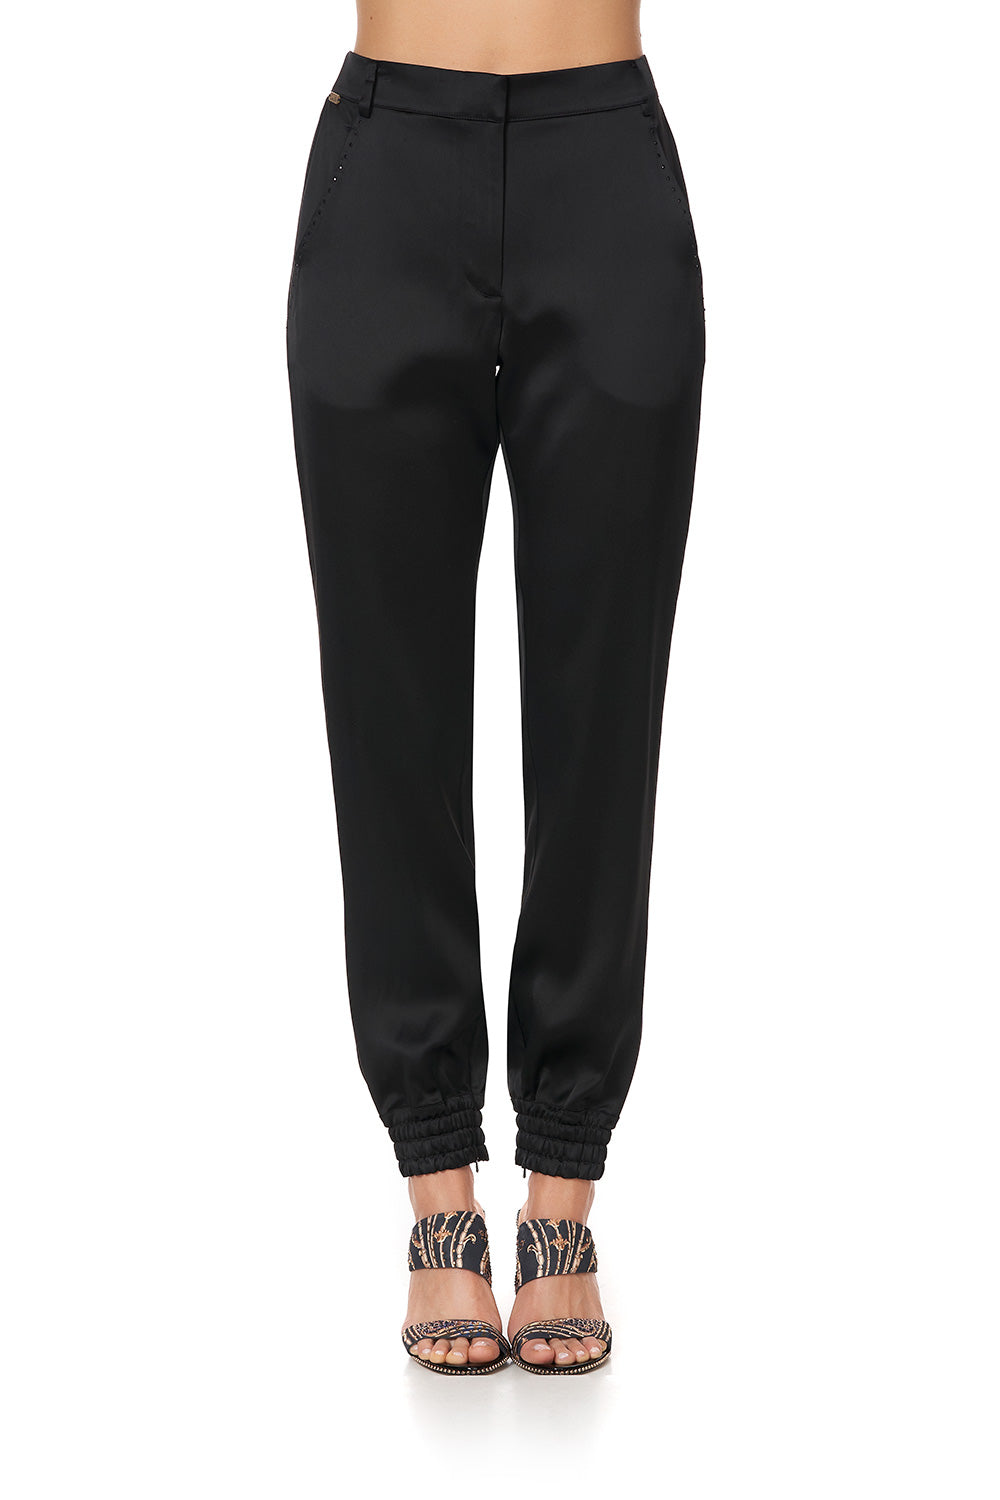 JOGGER WITH ENCASED ELASTIC CUFF SOLID BLACK